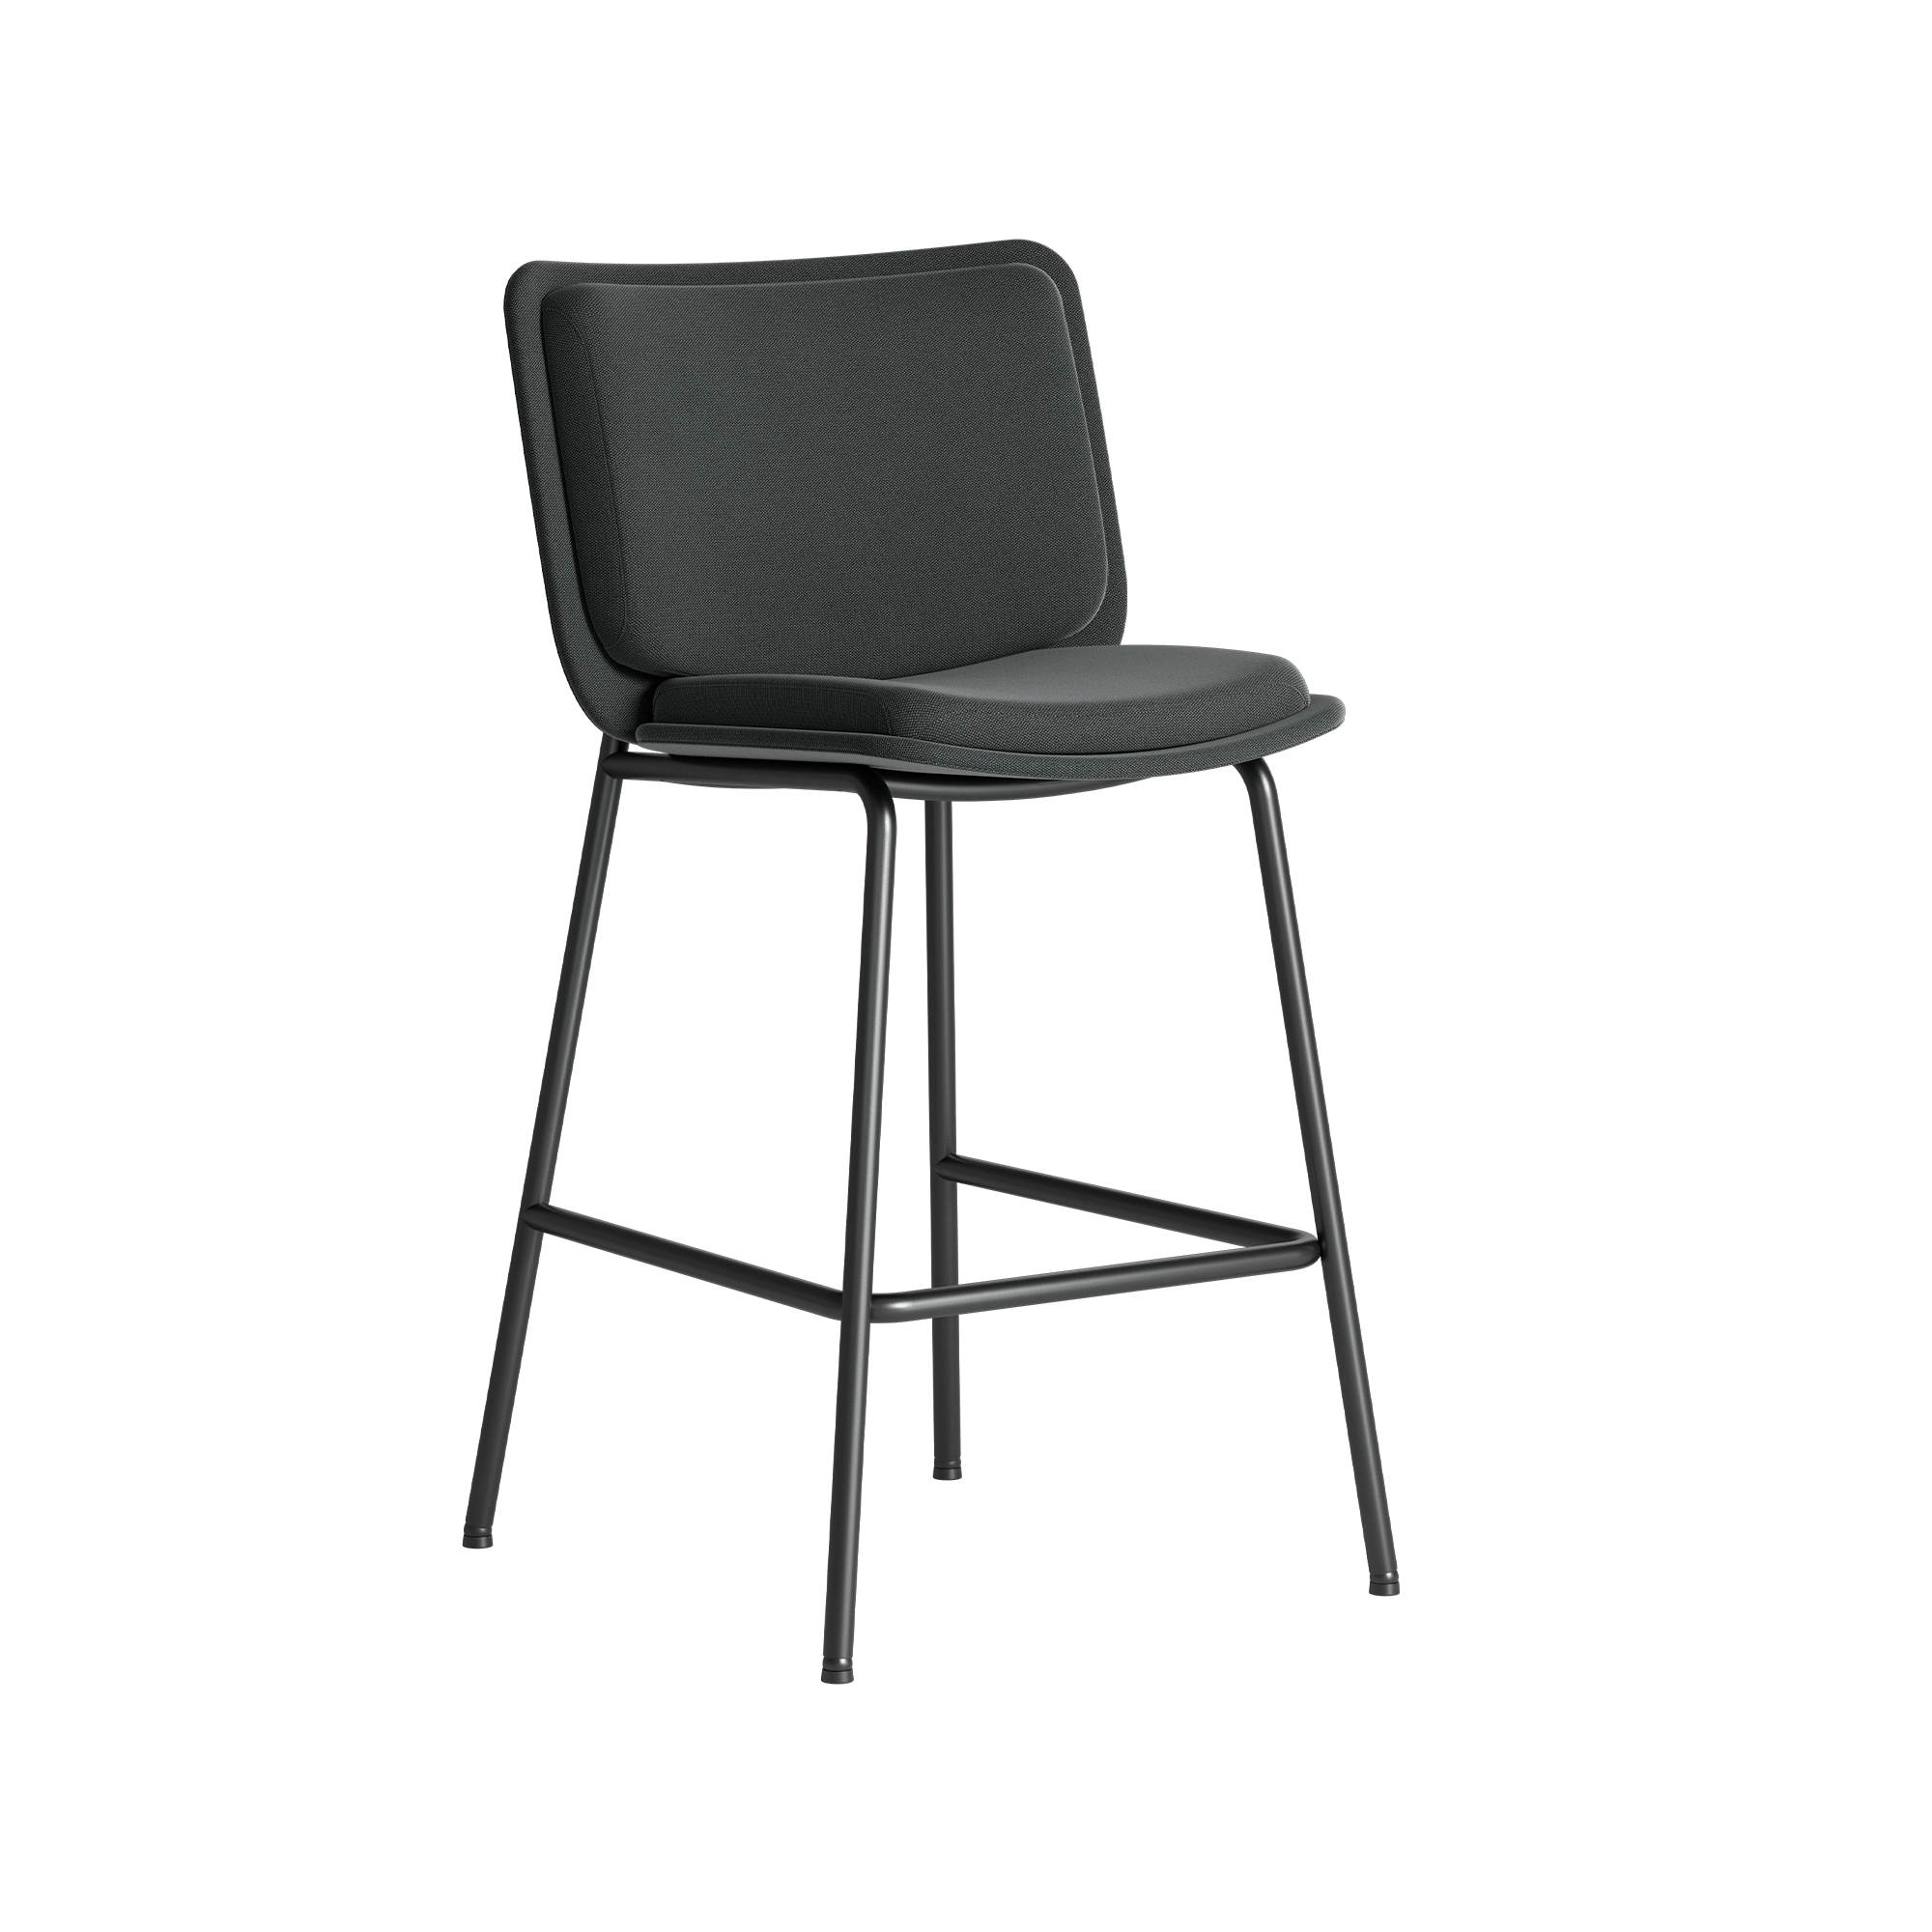 A black bar stool on a green background.